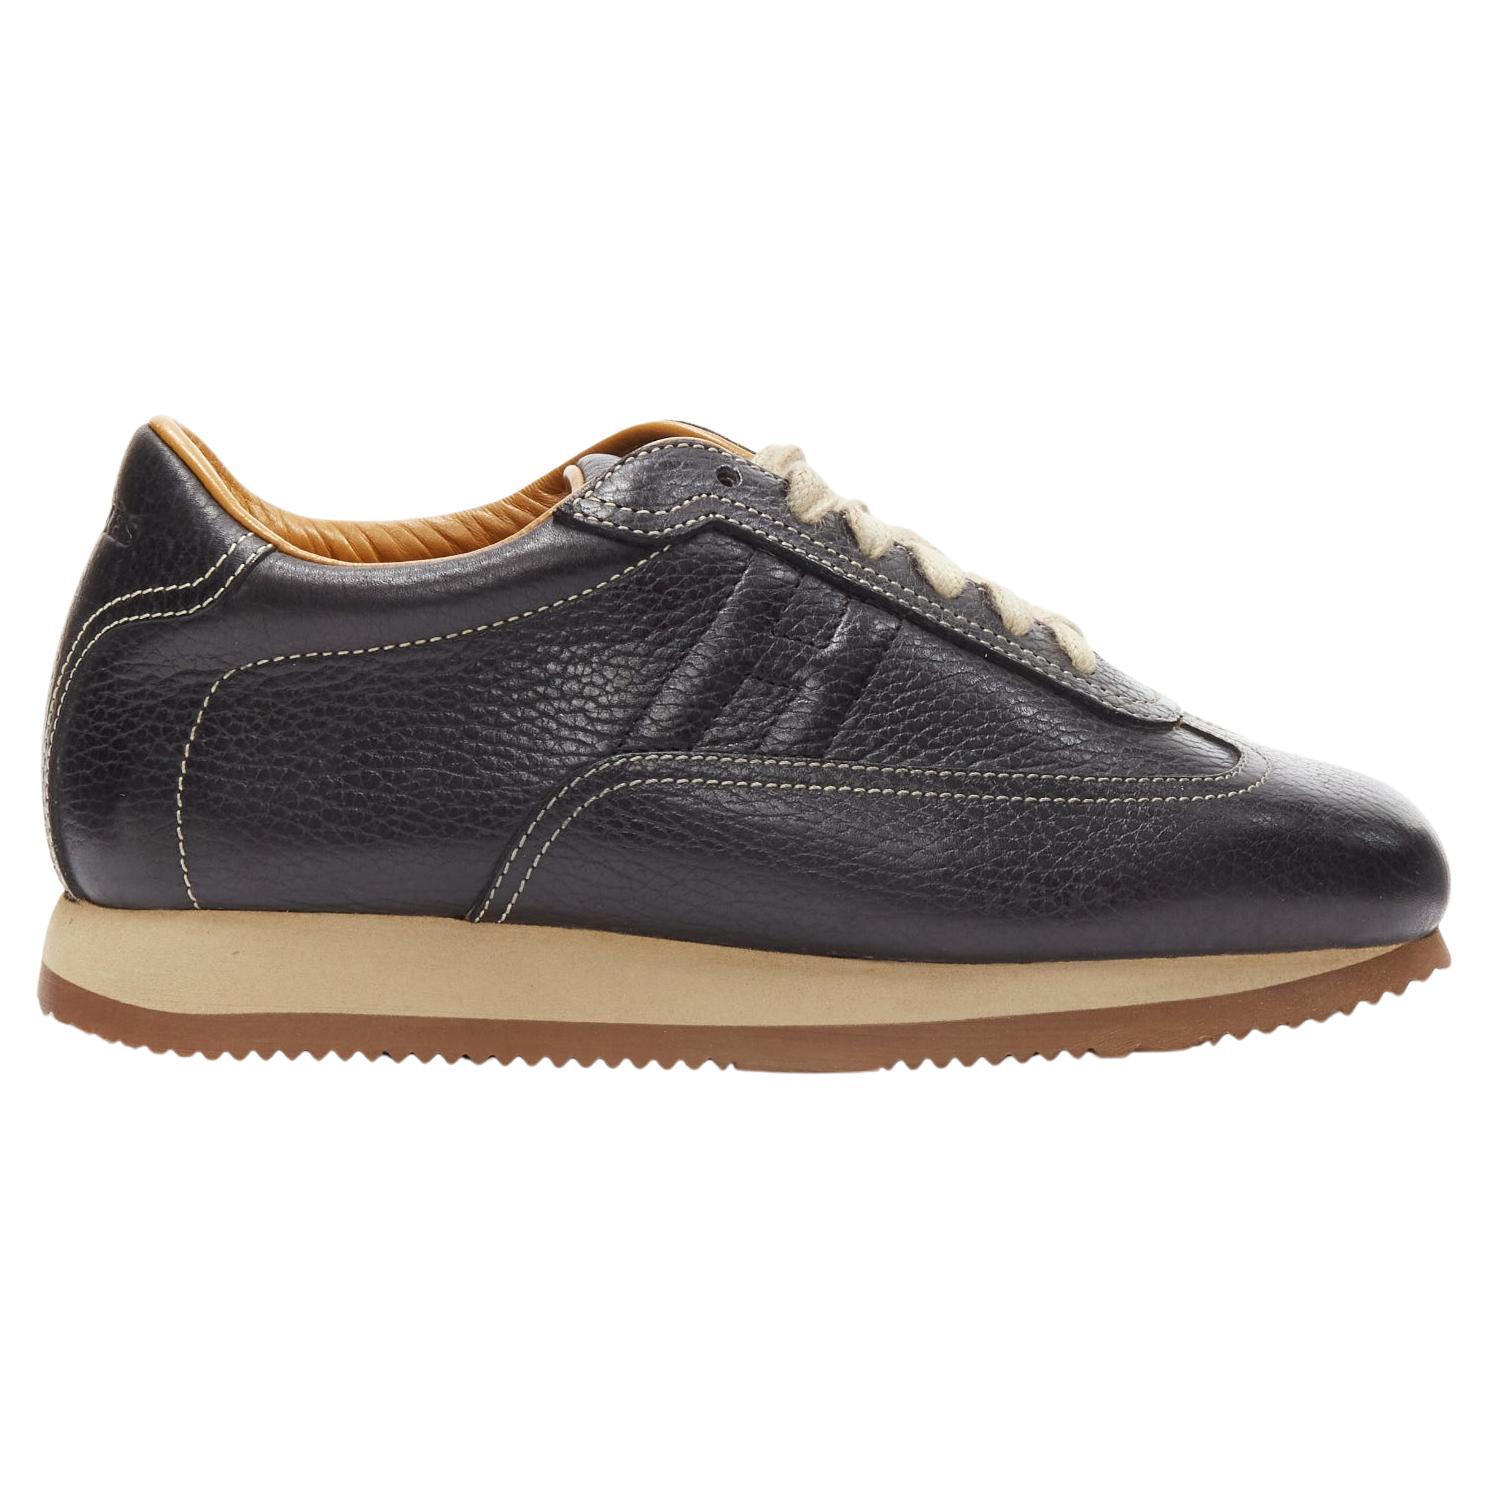 HERMES Quick black calfskin leather H logo low sneakers EU37.5 For Sale